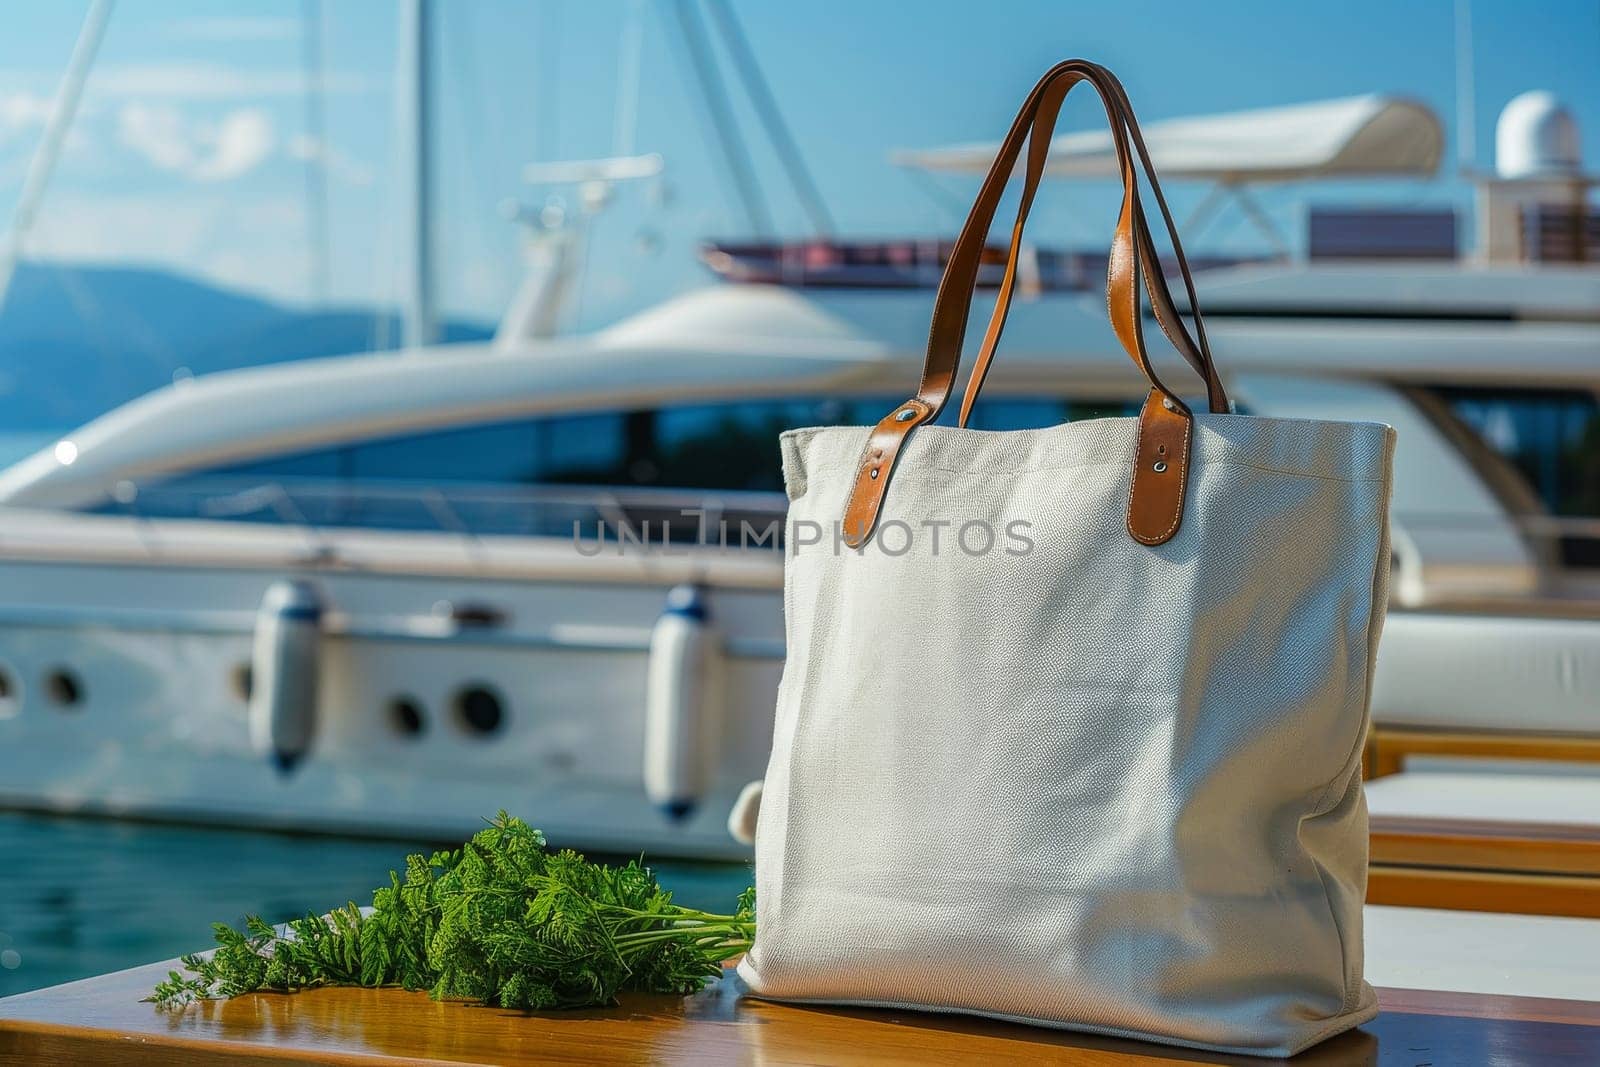 A white purse is sitting on a table next to a boat. The purse is made of leather and has a brown strap. The scene is set on a sunny day, with the boat in the background and the purse on the table